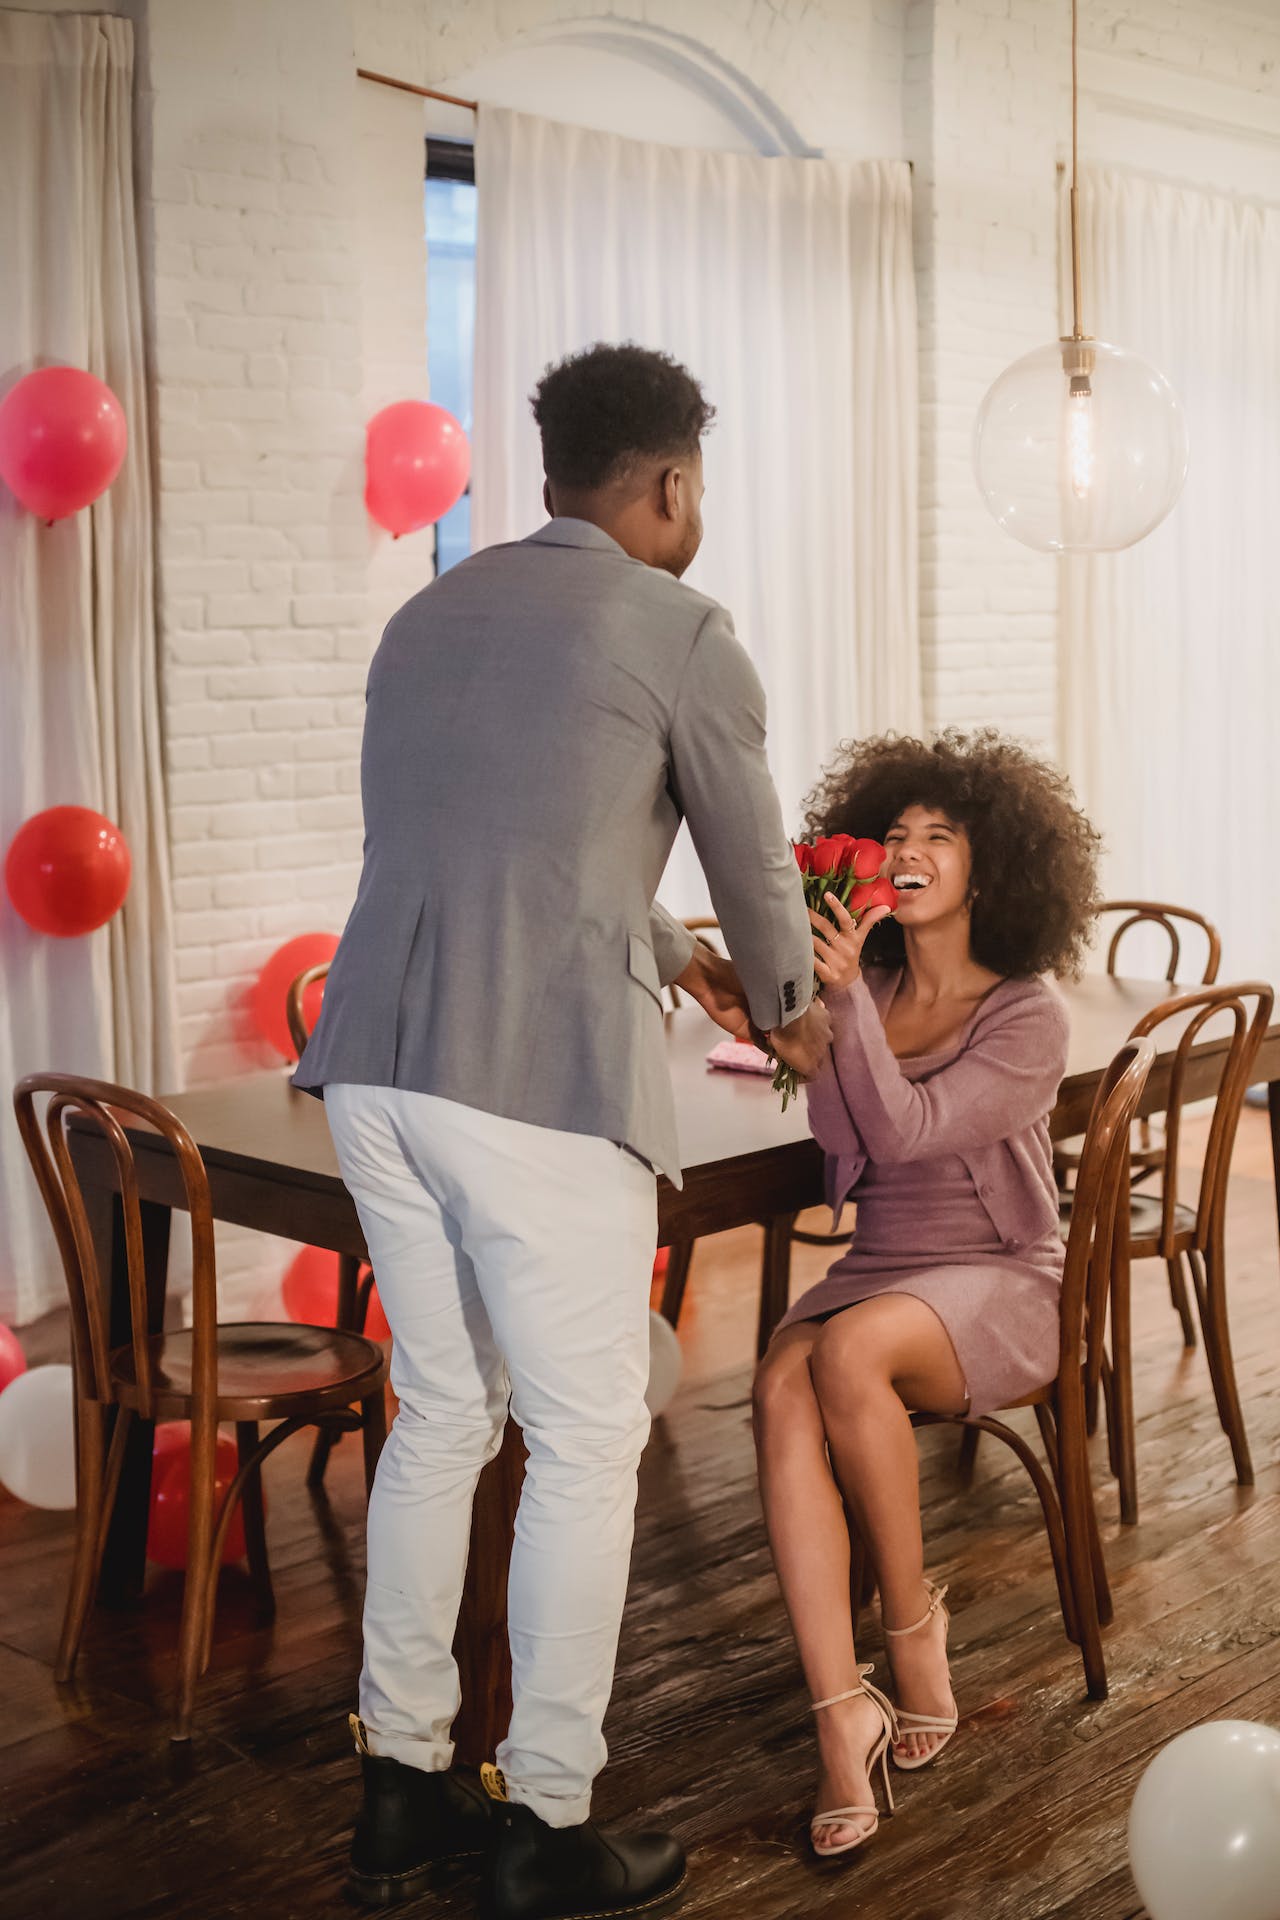 Black man giving bouquet of roses to woman at table